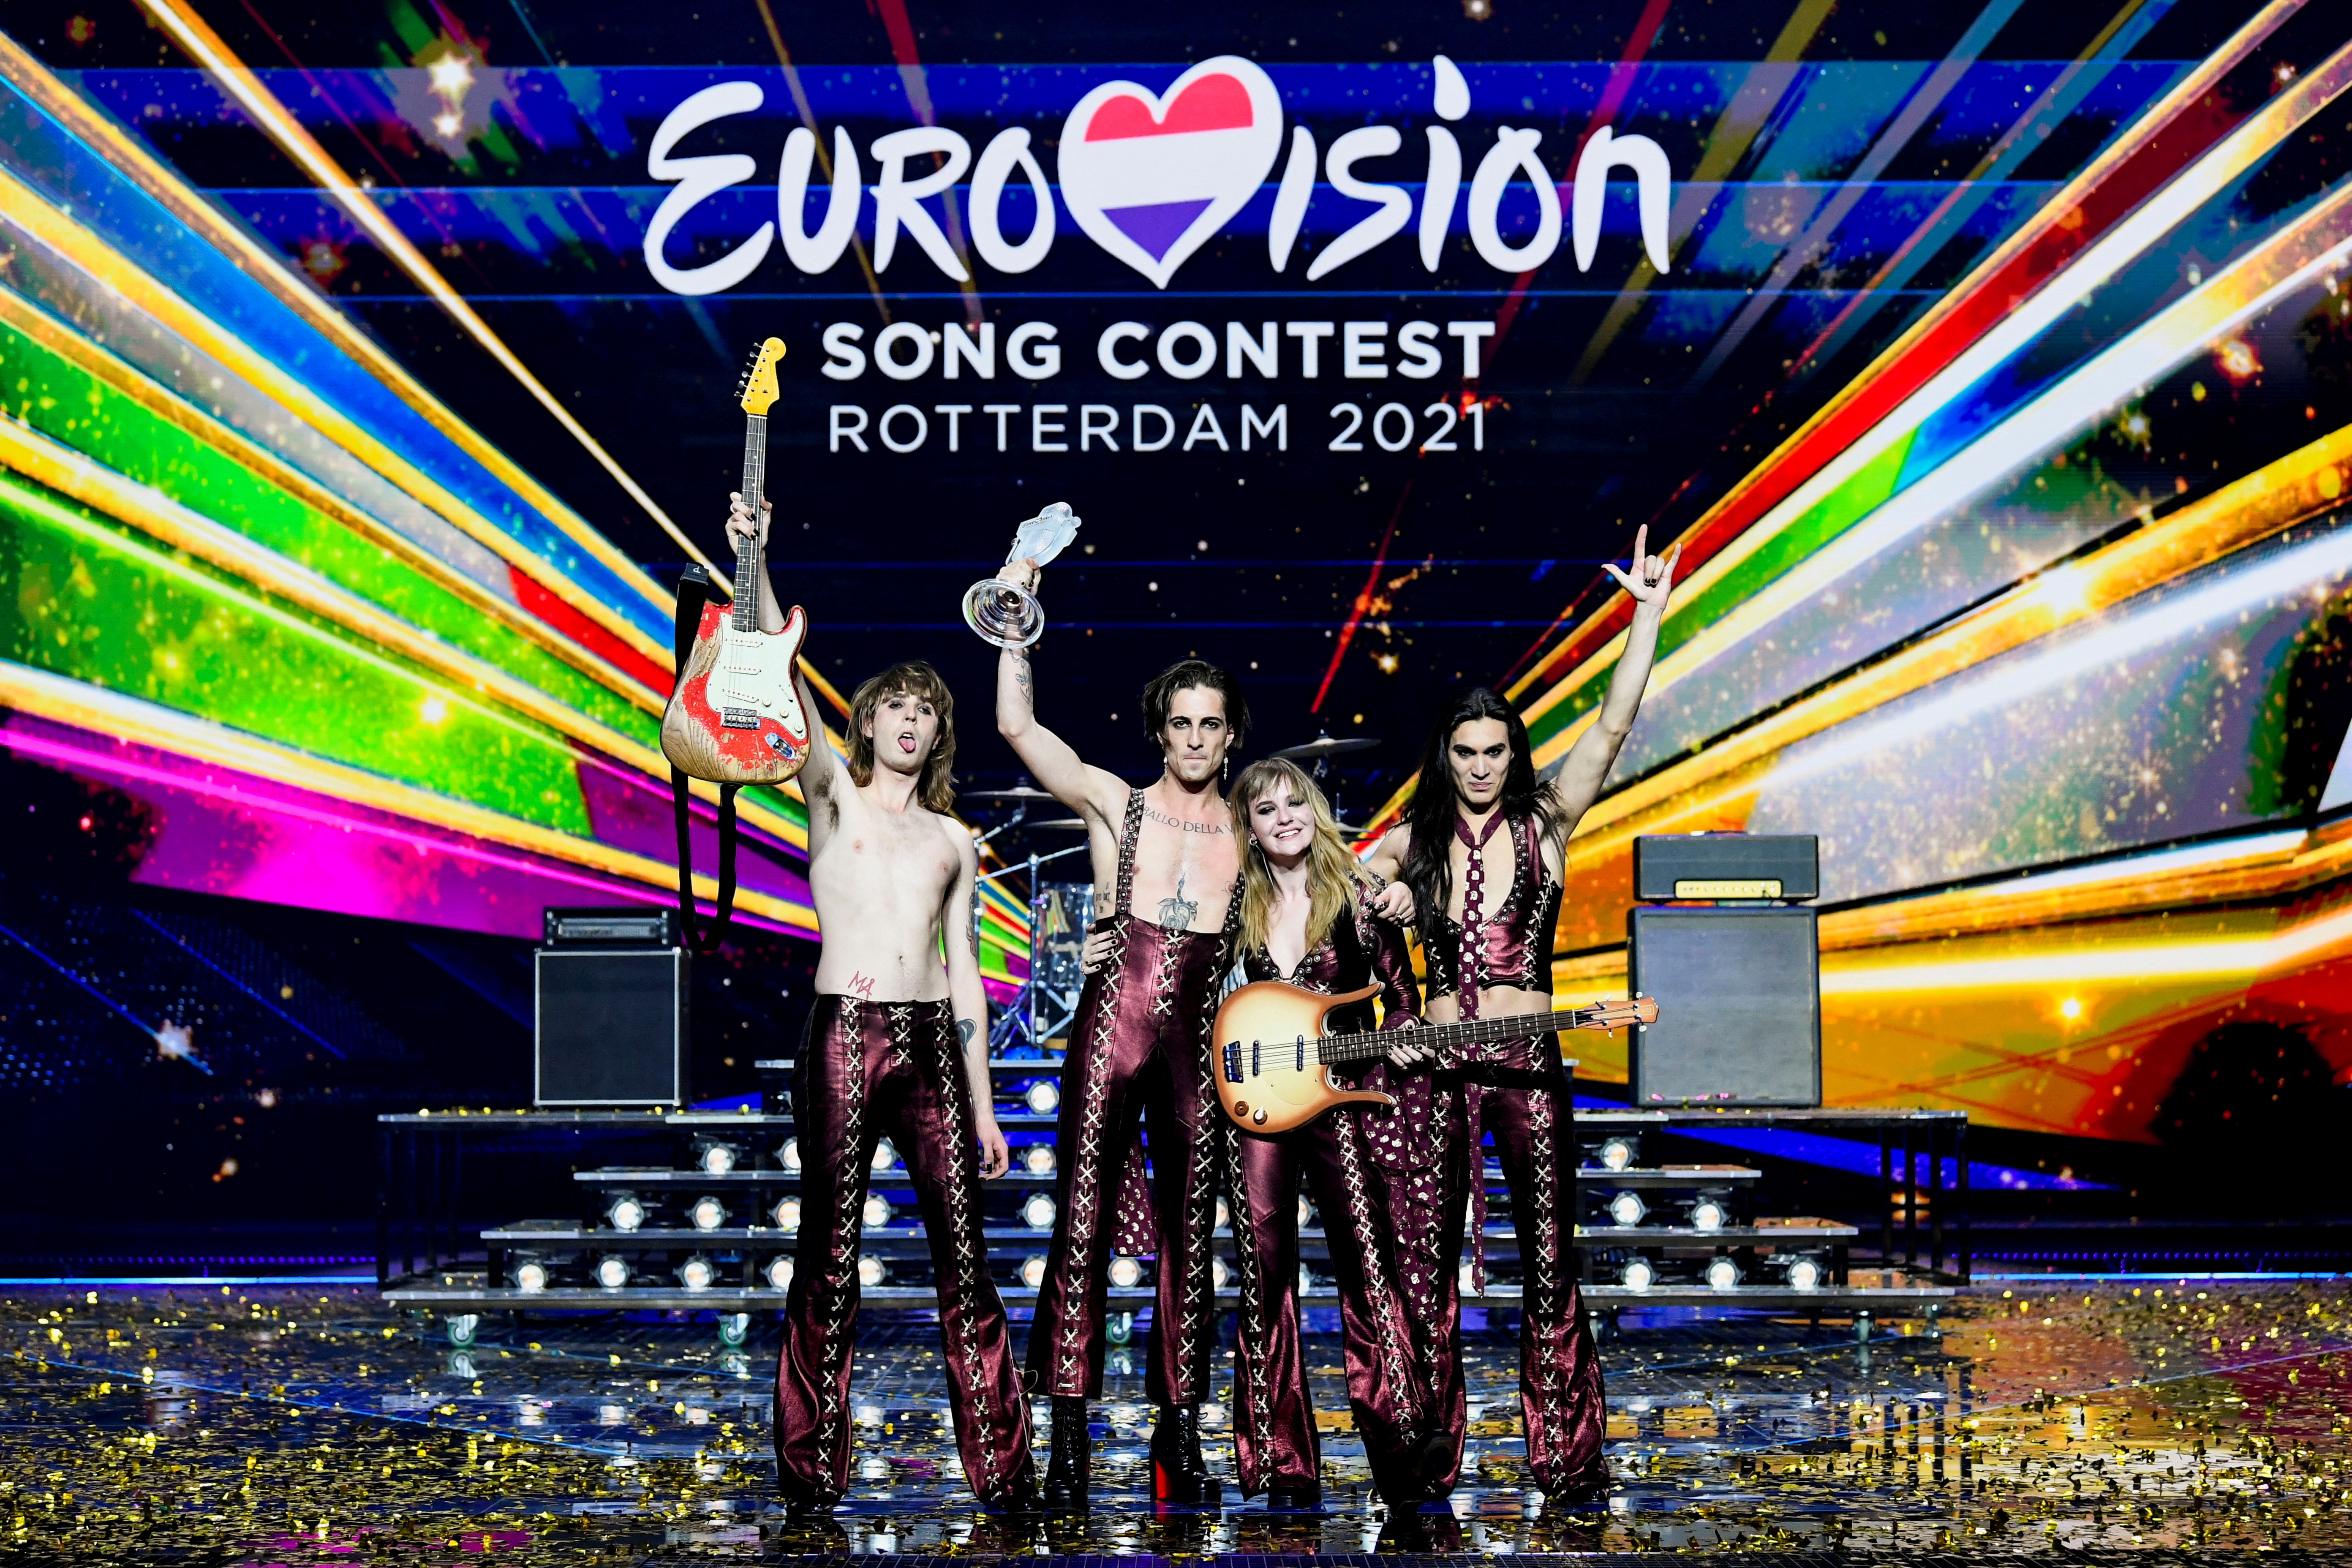 2021 Eurovision Song Contest in Rotterdam